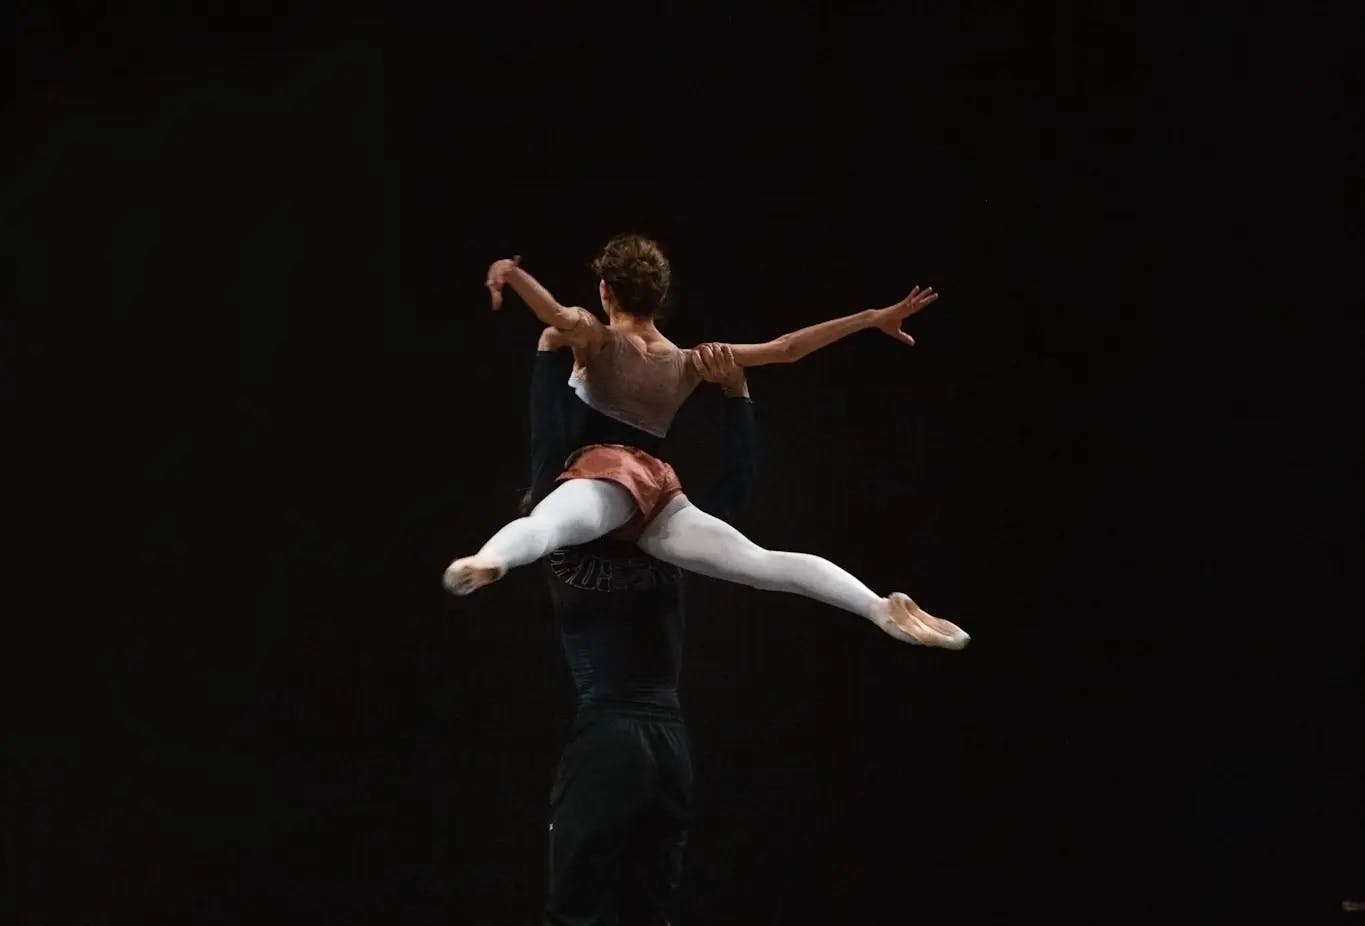 Photo: Cube 521, from the rehearsal of Carmen, a new performance by Ballet Luxembourg